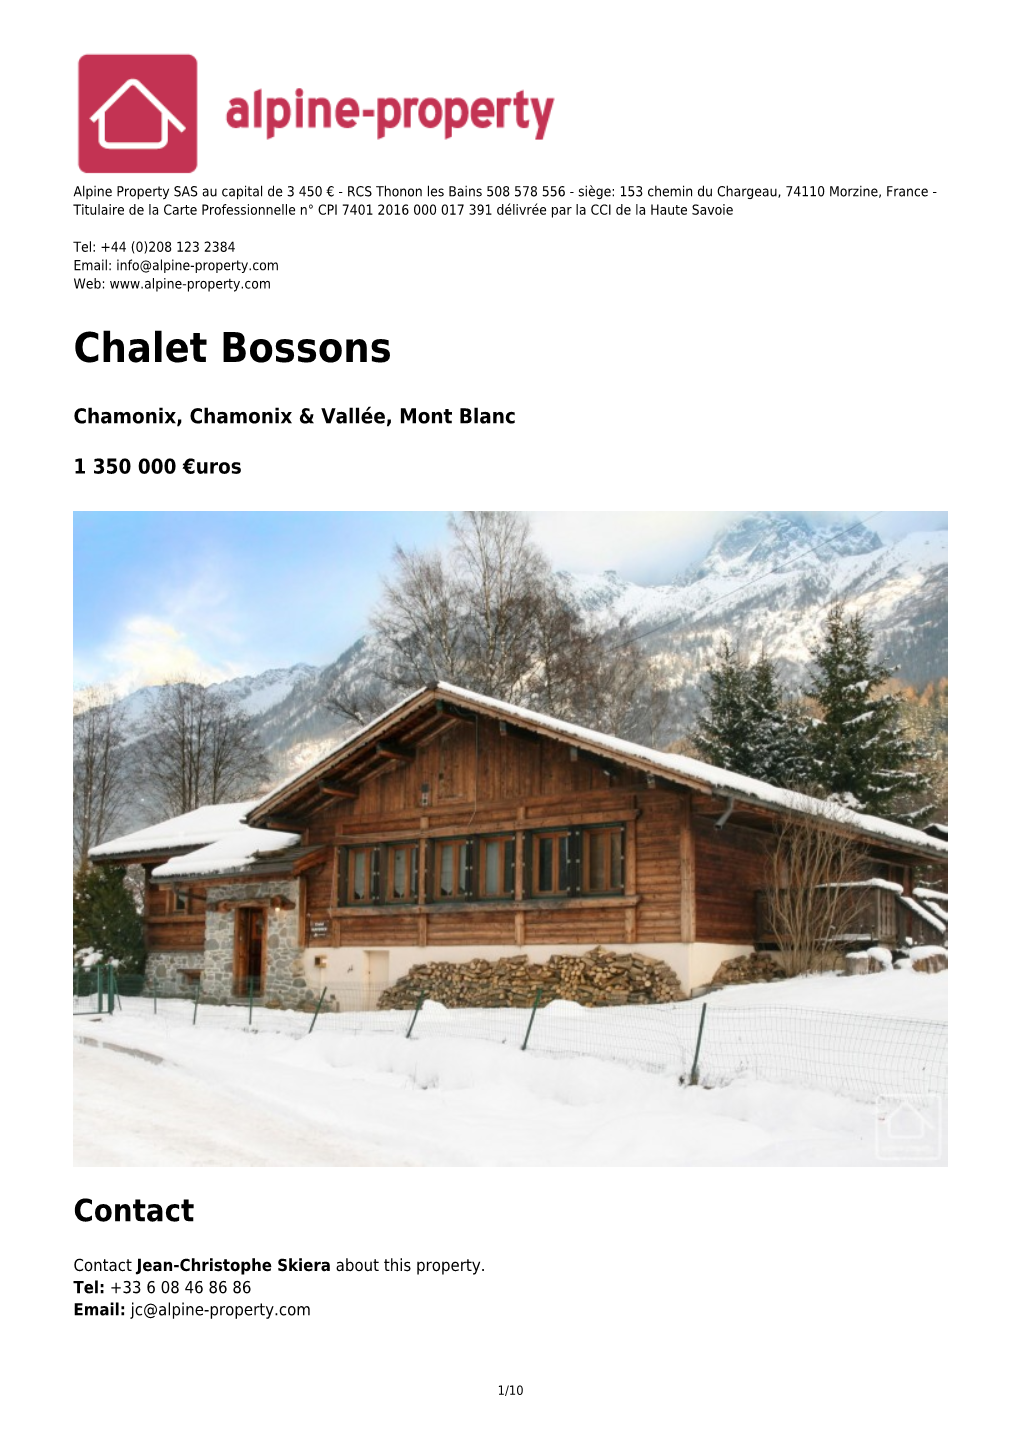 Chalet Bossons